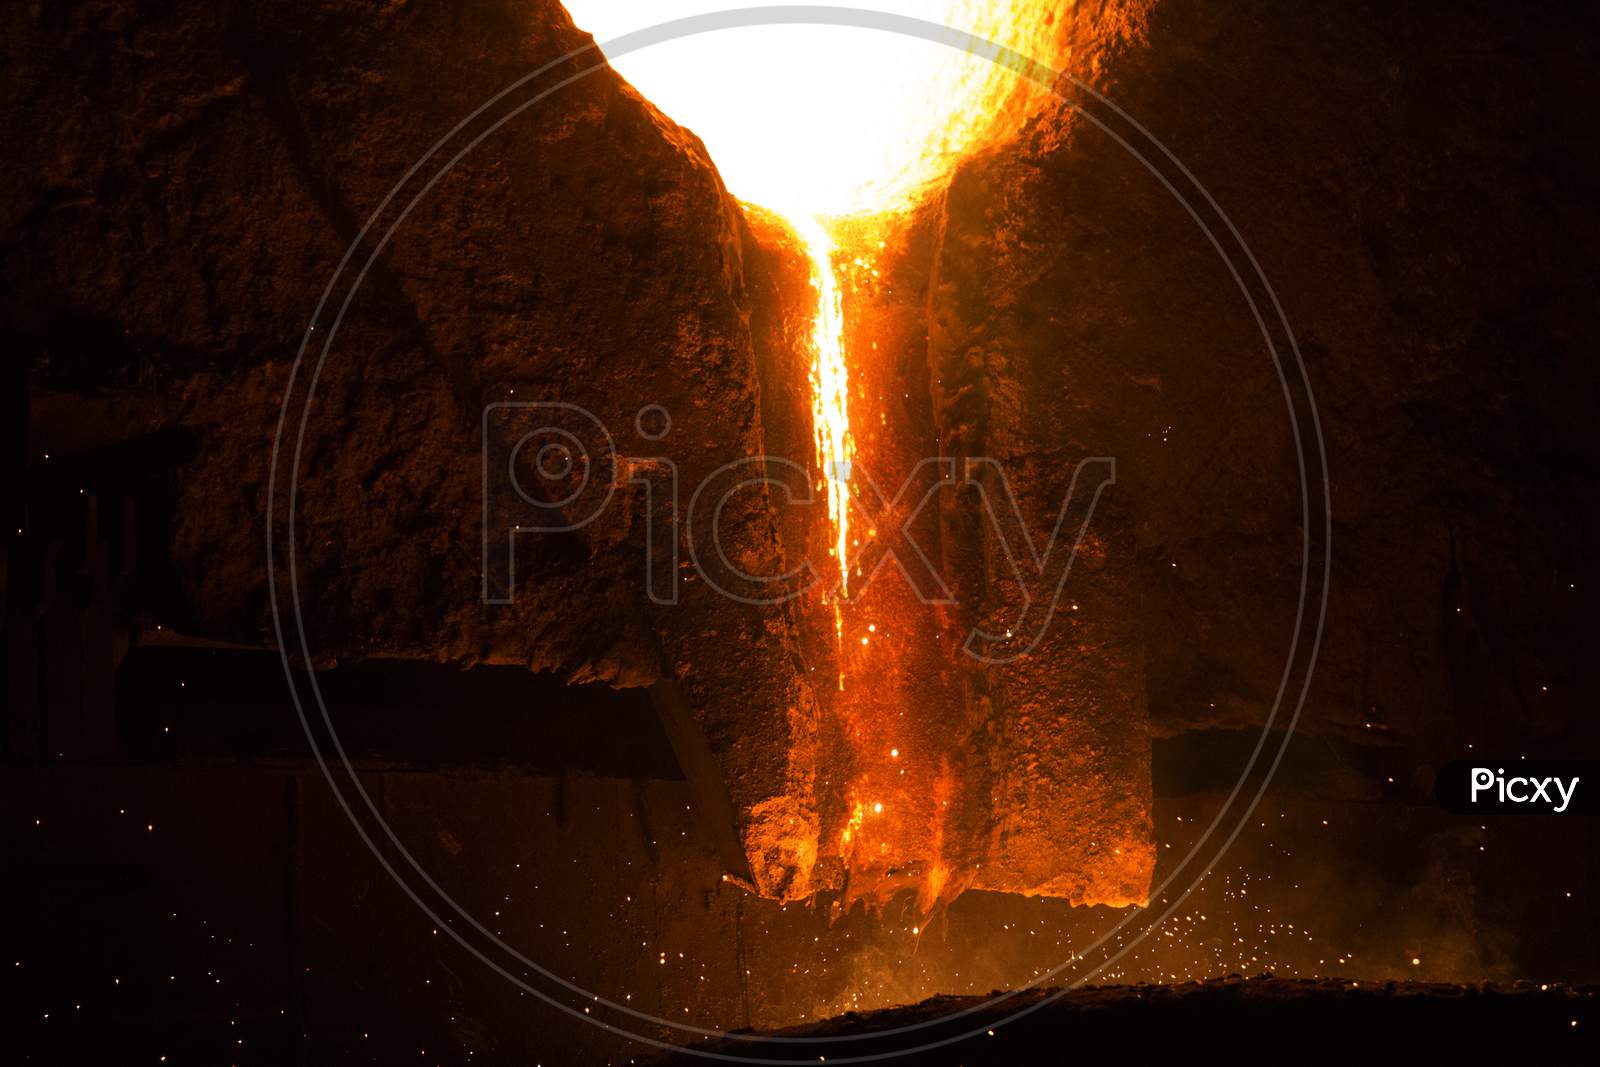 Heated Metal Pig Gets Squeezed And Drilled At Special Metal Forging Unit At Brueck Metal Forging Factory In Demra, Dhaka, Bangladesh.